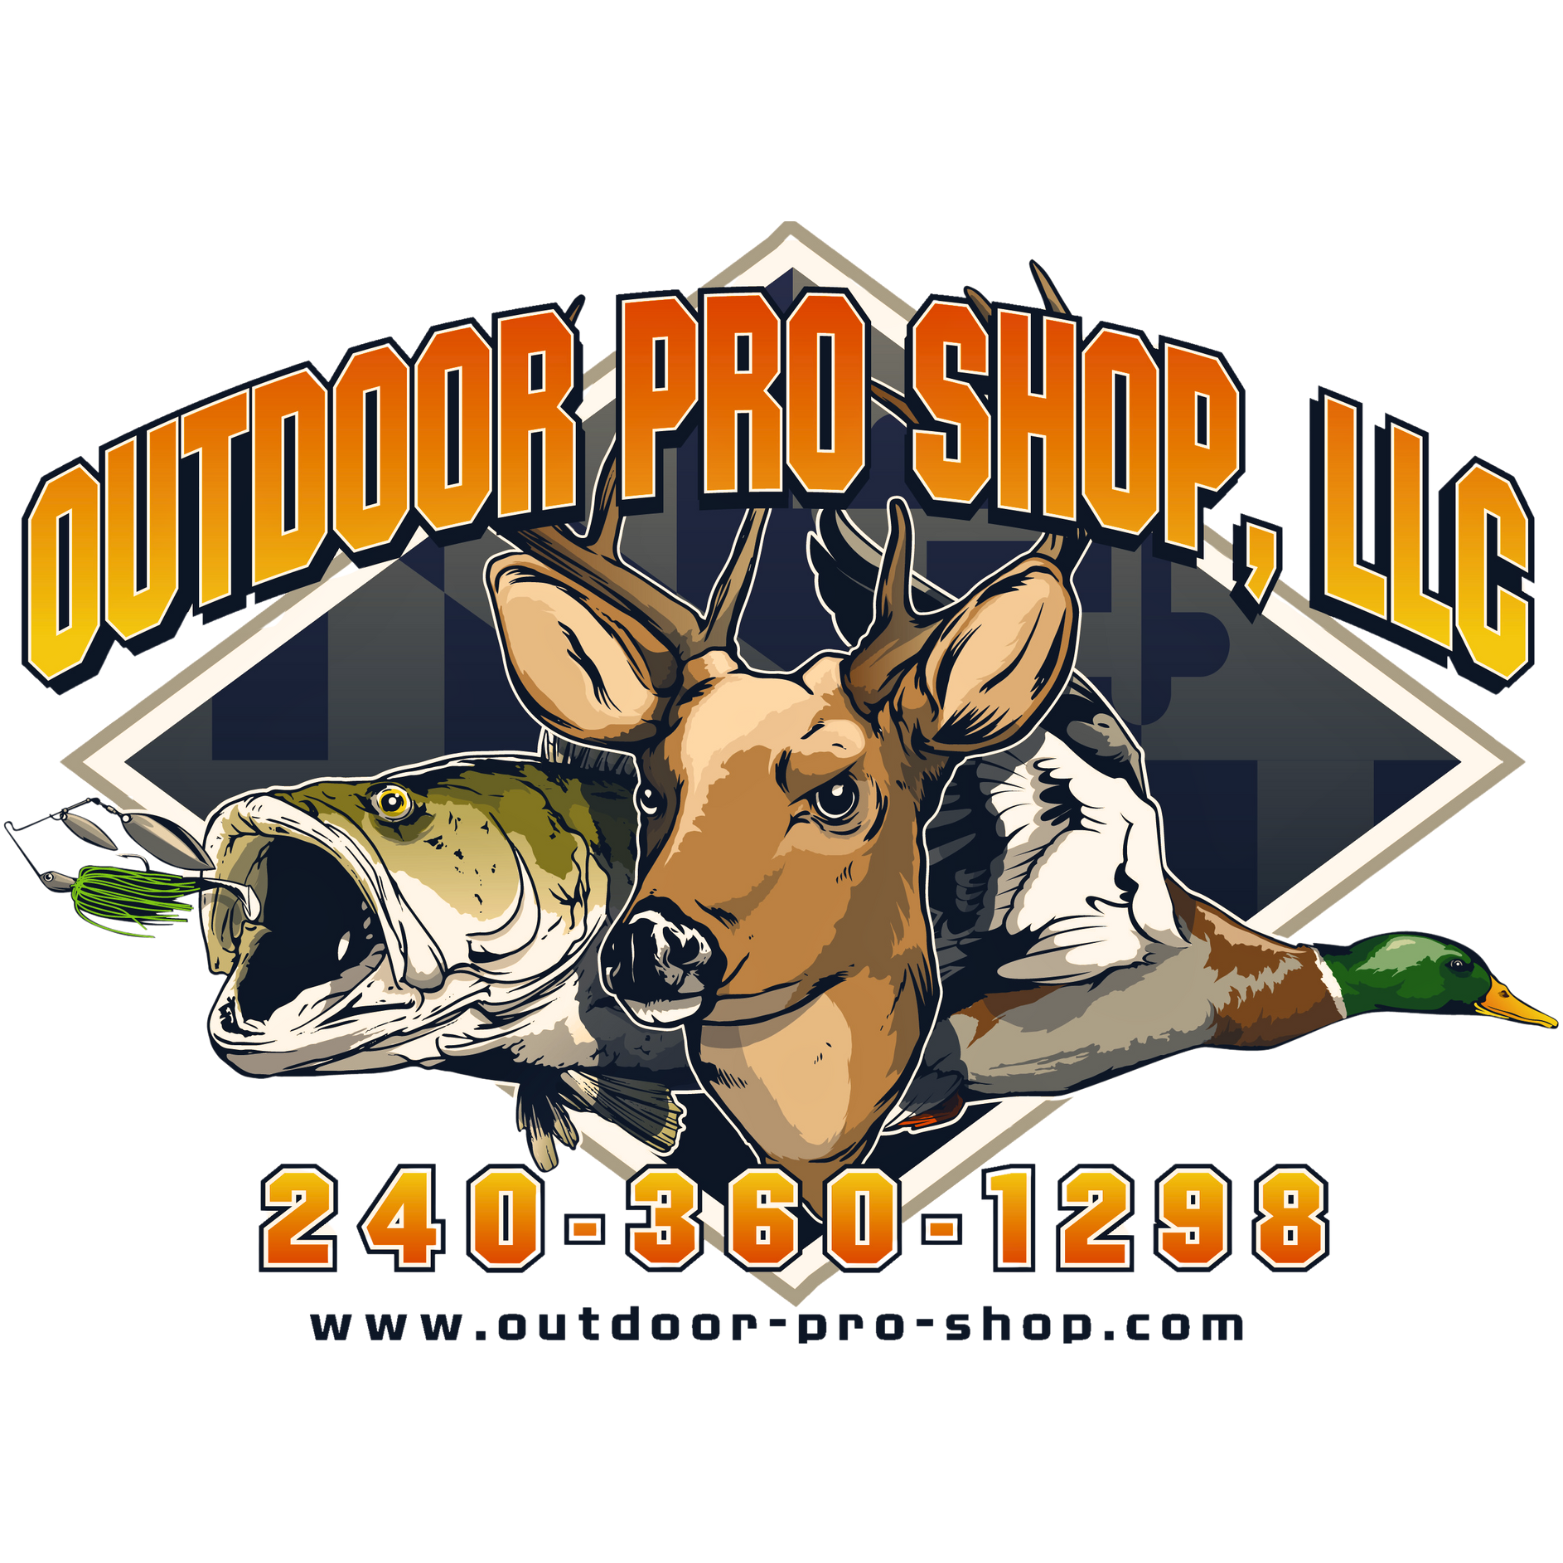 Outdoor Pro Shop - Firearms Legal Protection